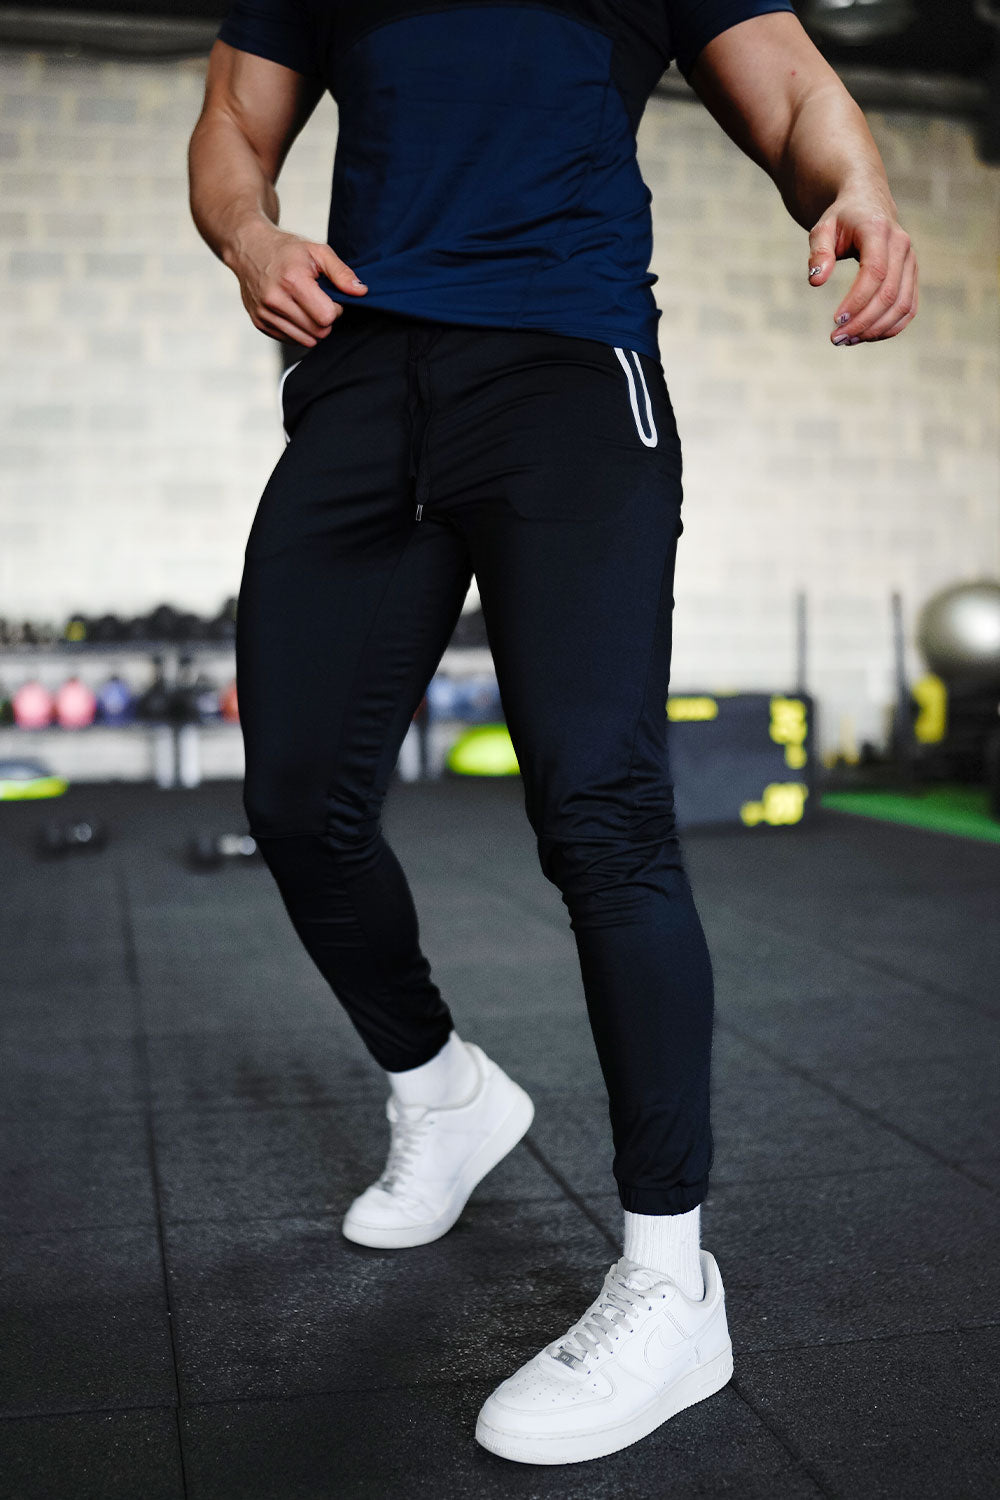  Men's Gym Fitness Workout Pants Bodybuilding Tapered